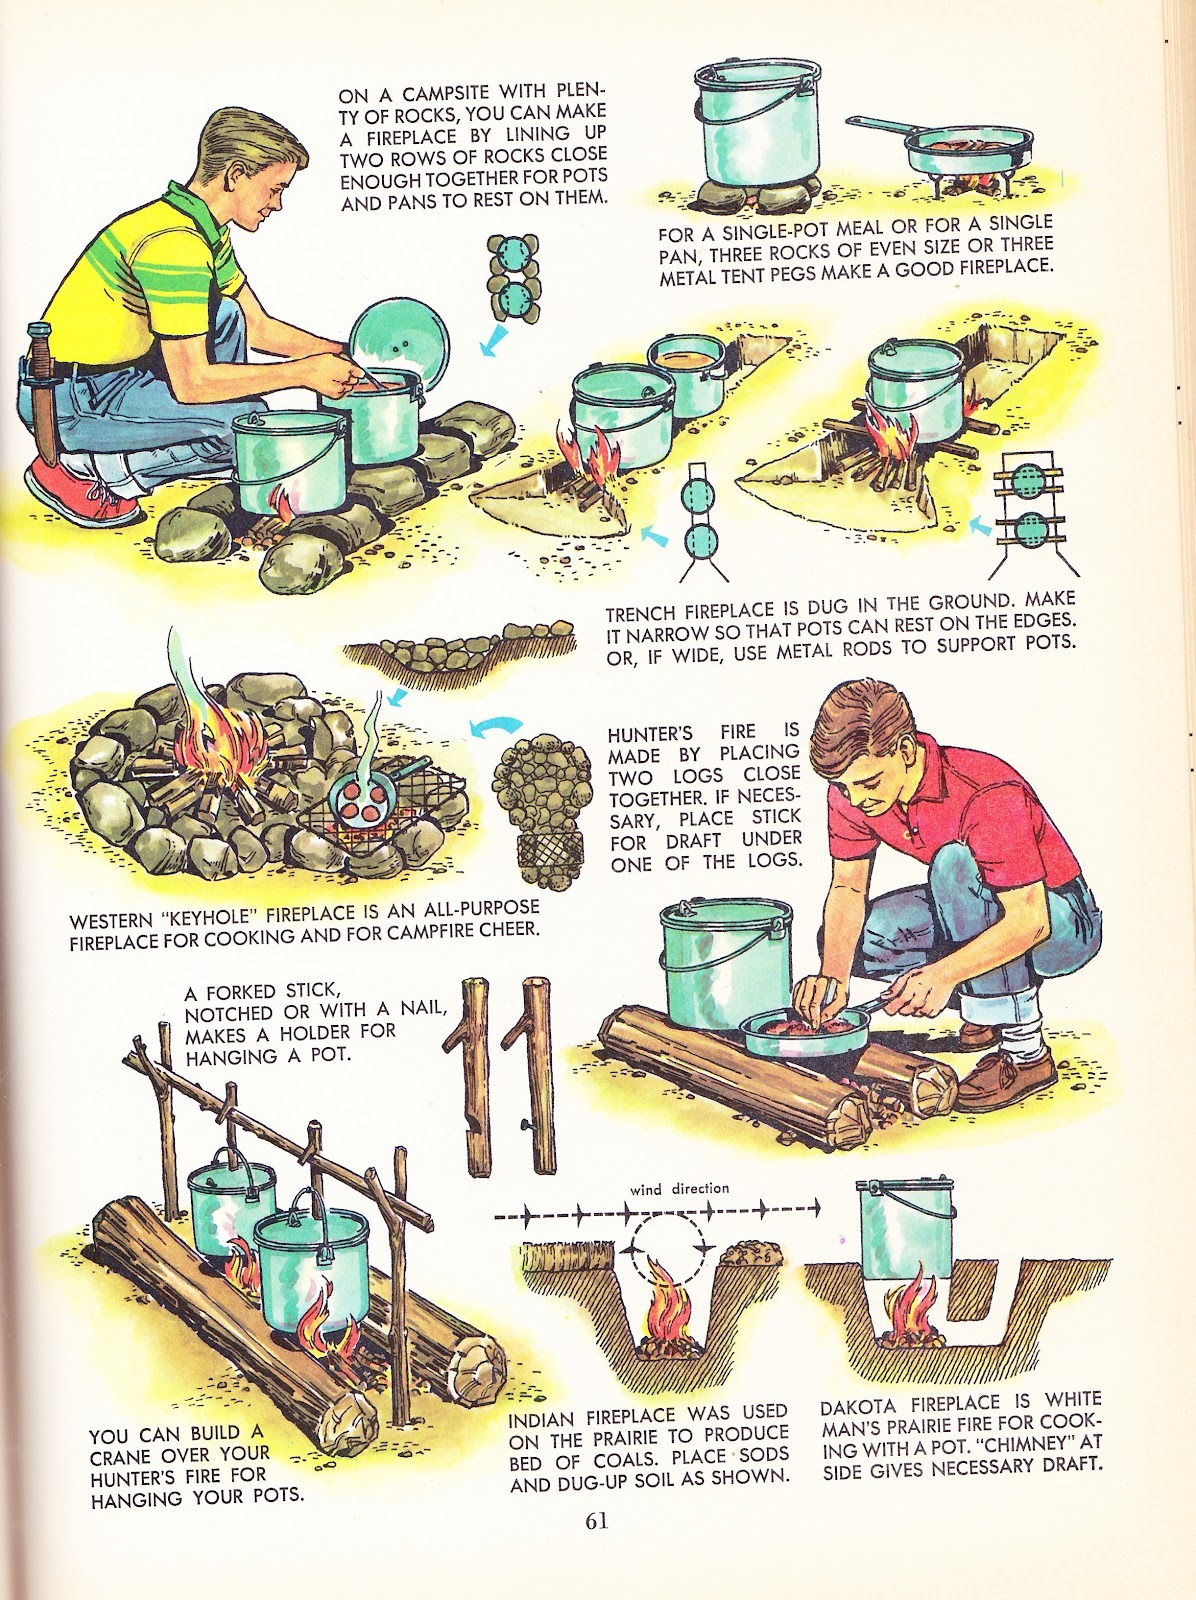 bastard-woodsman:
“Page excerpt from The Golden Book of Camping and Camping Crafts; Gordon Lynn 1959; illustrated by Ernest Kurt Barth
”